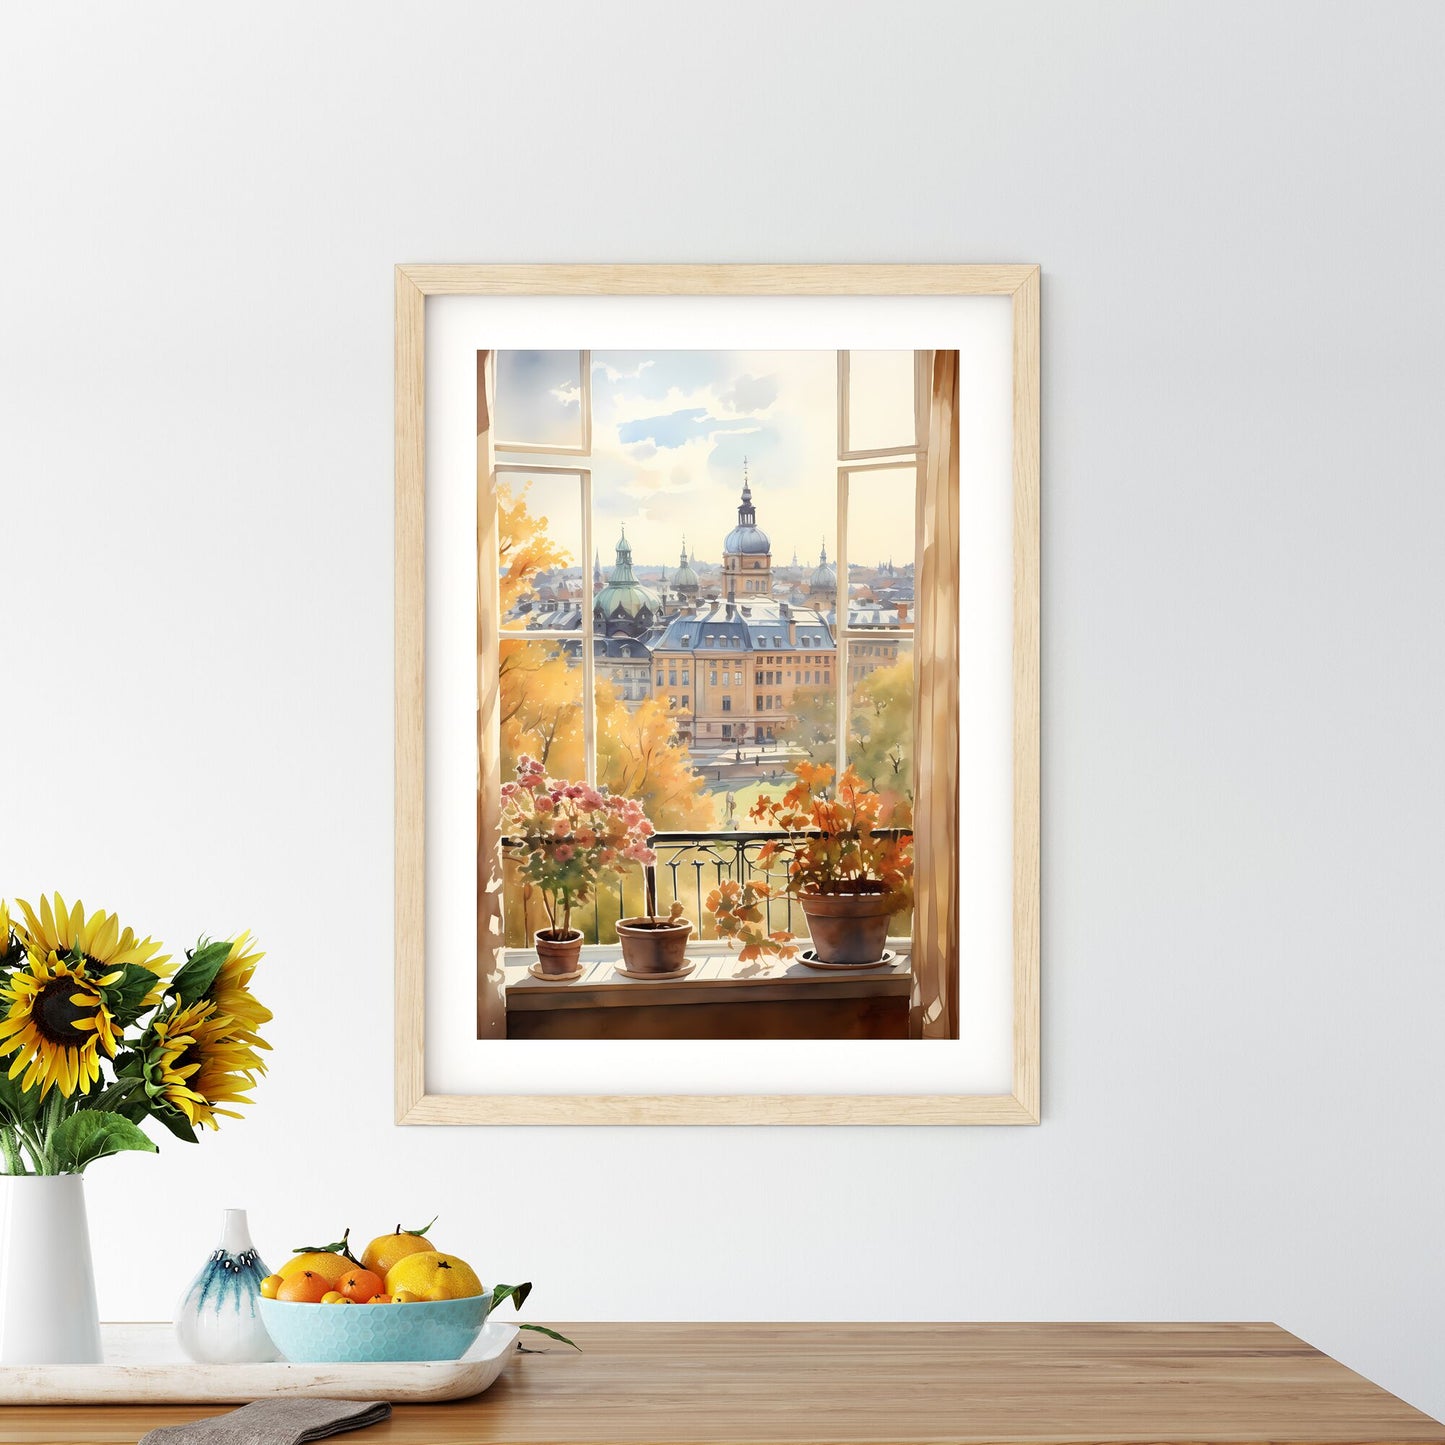 Watercolor Painting Of A Window With A View Of A City And Trees Art Print Default Title